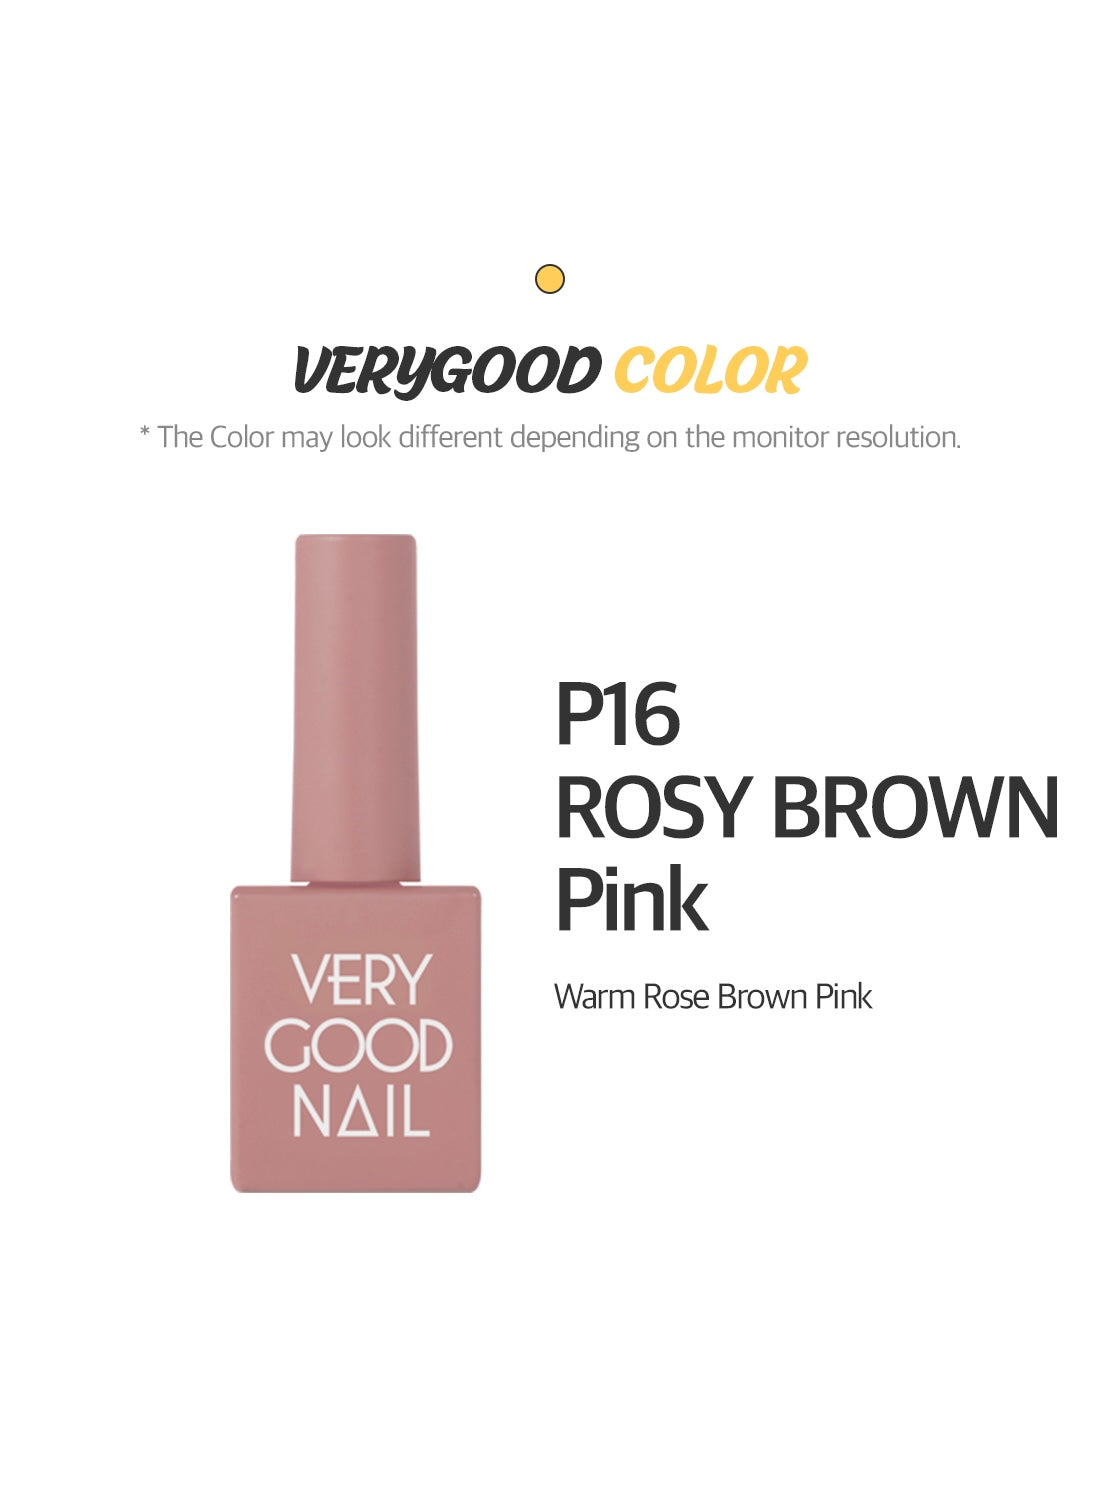 P16 - Rosy Brown Pink